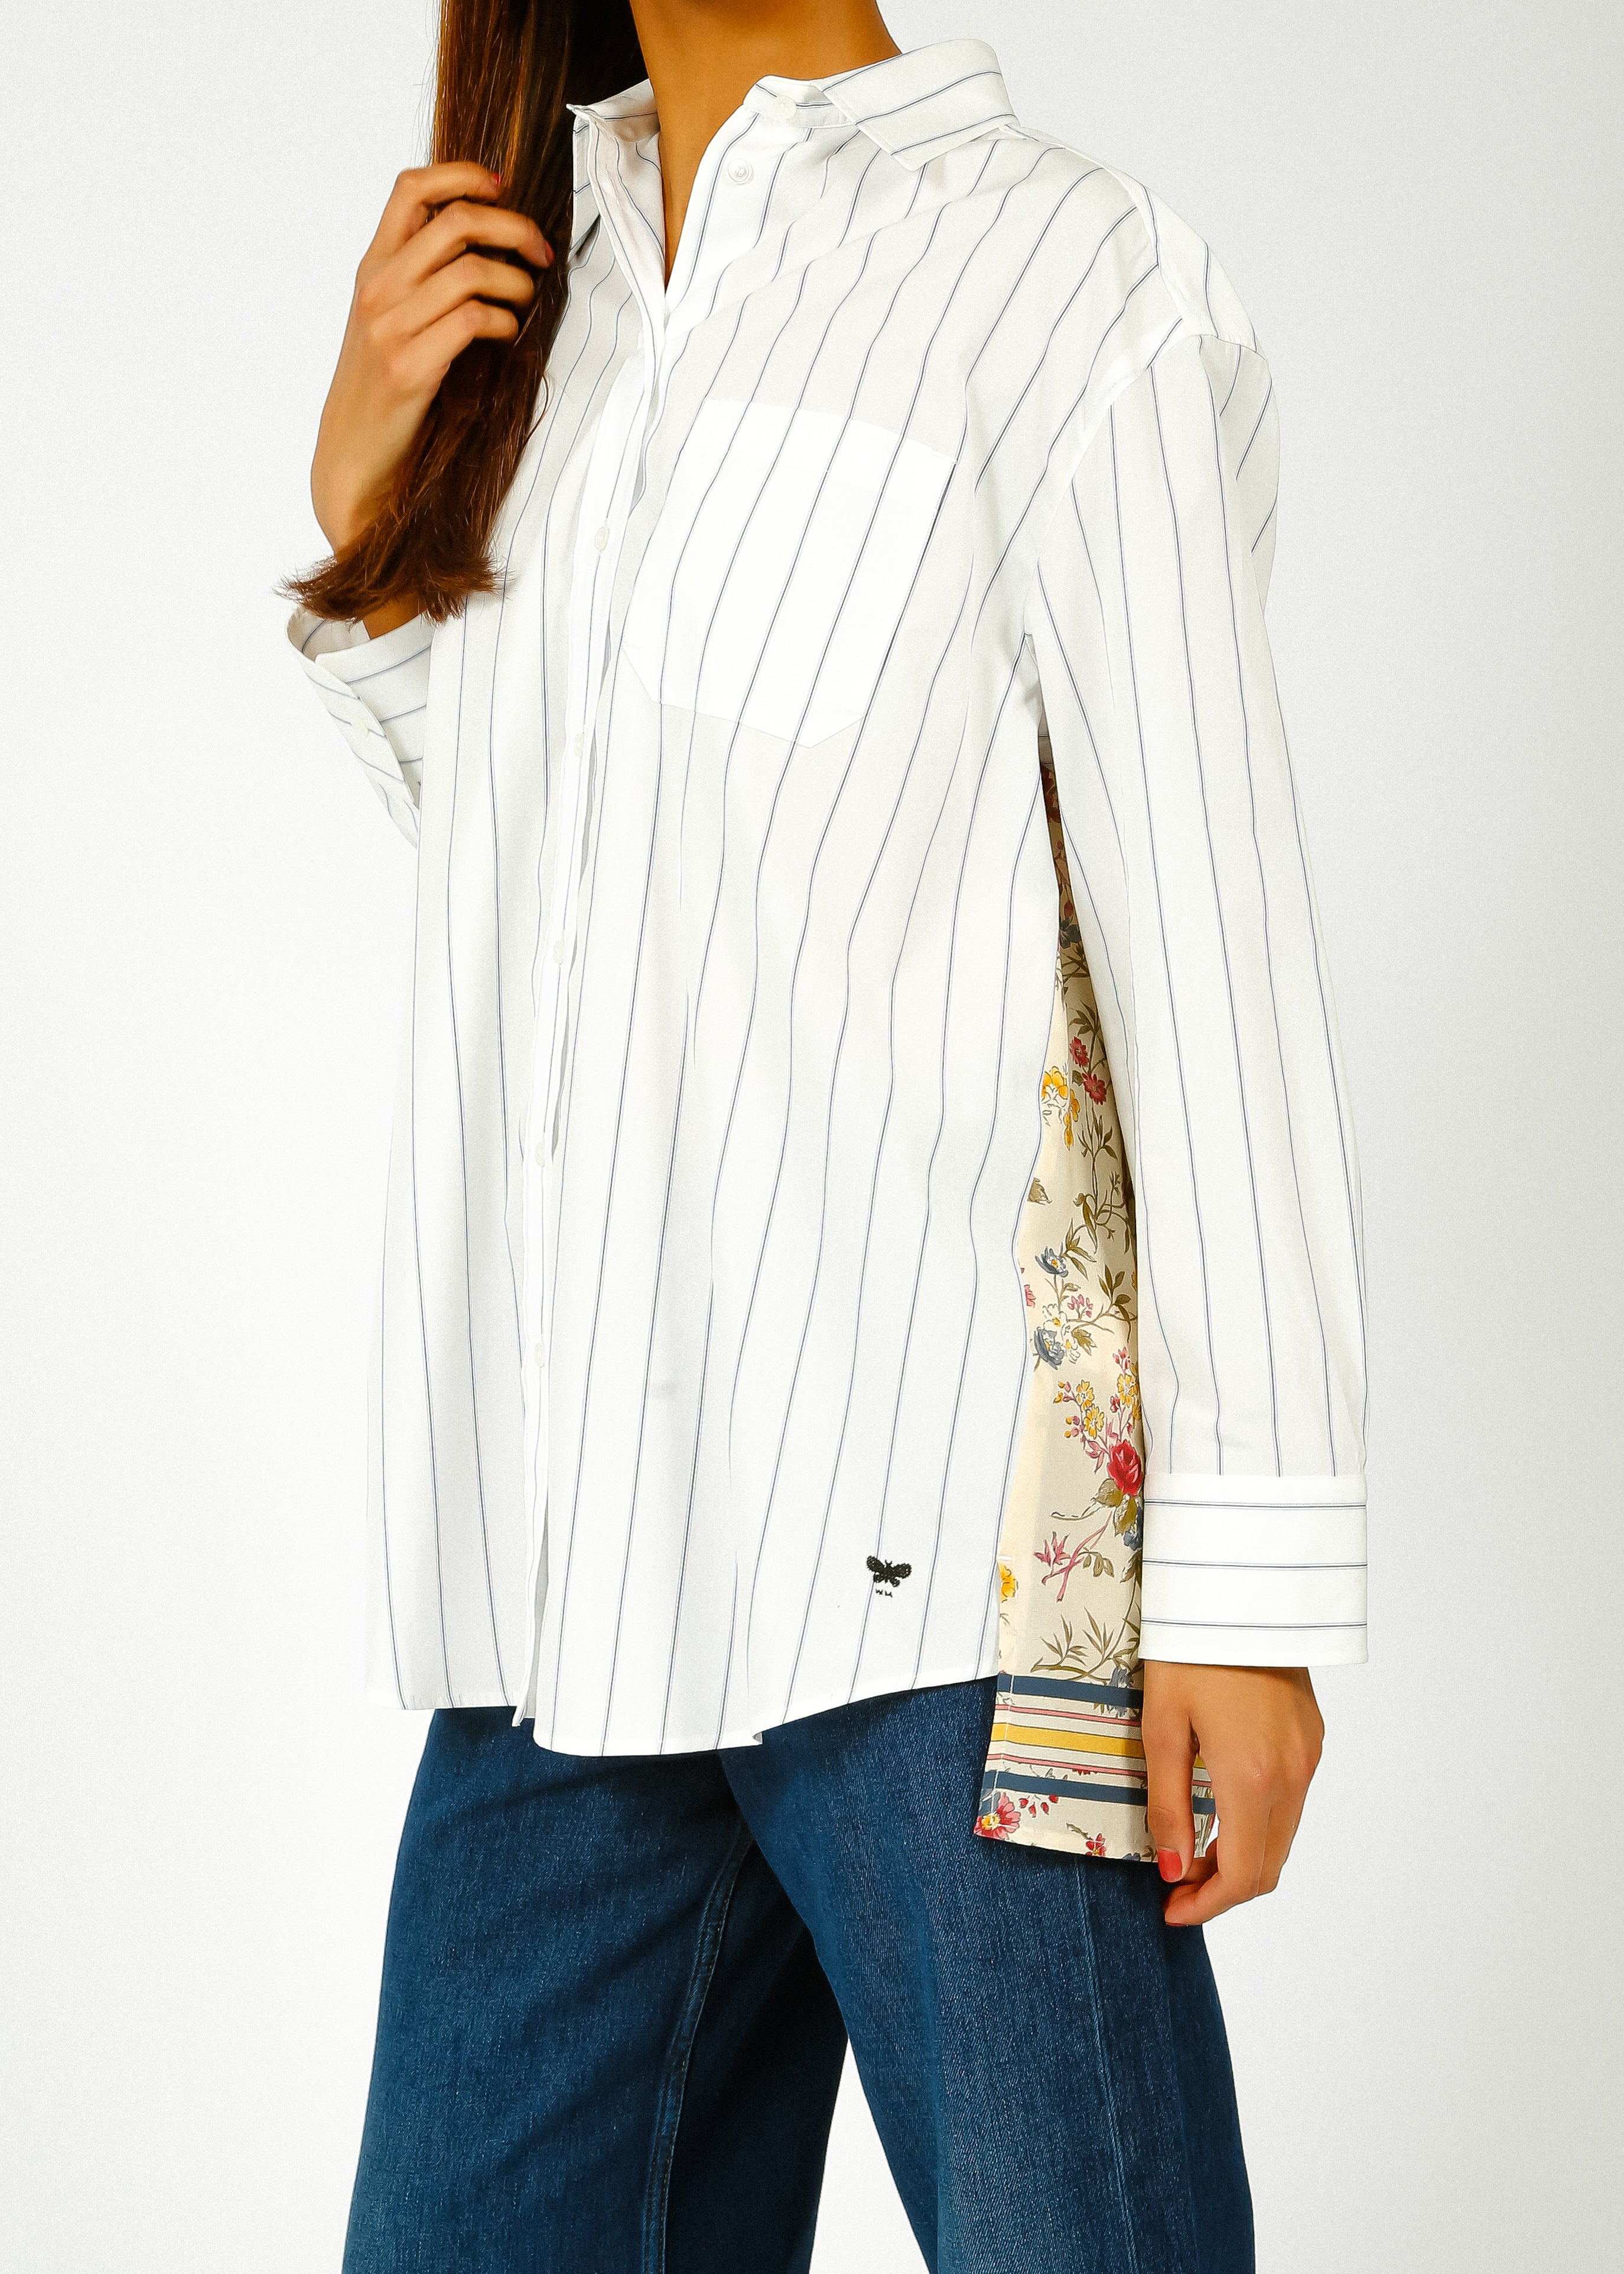 MM Corolla Stripe Shirt in Navy, Floral